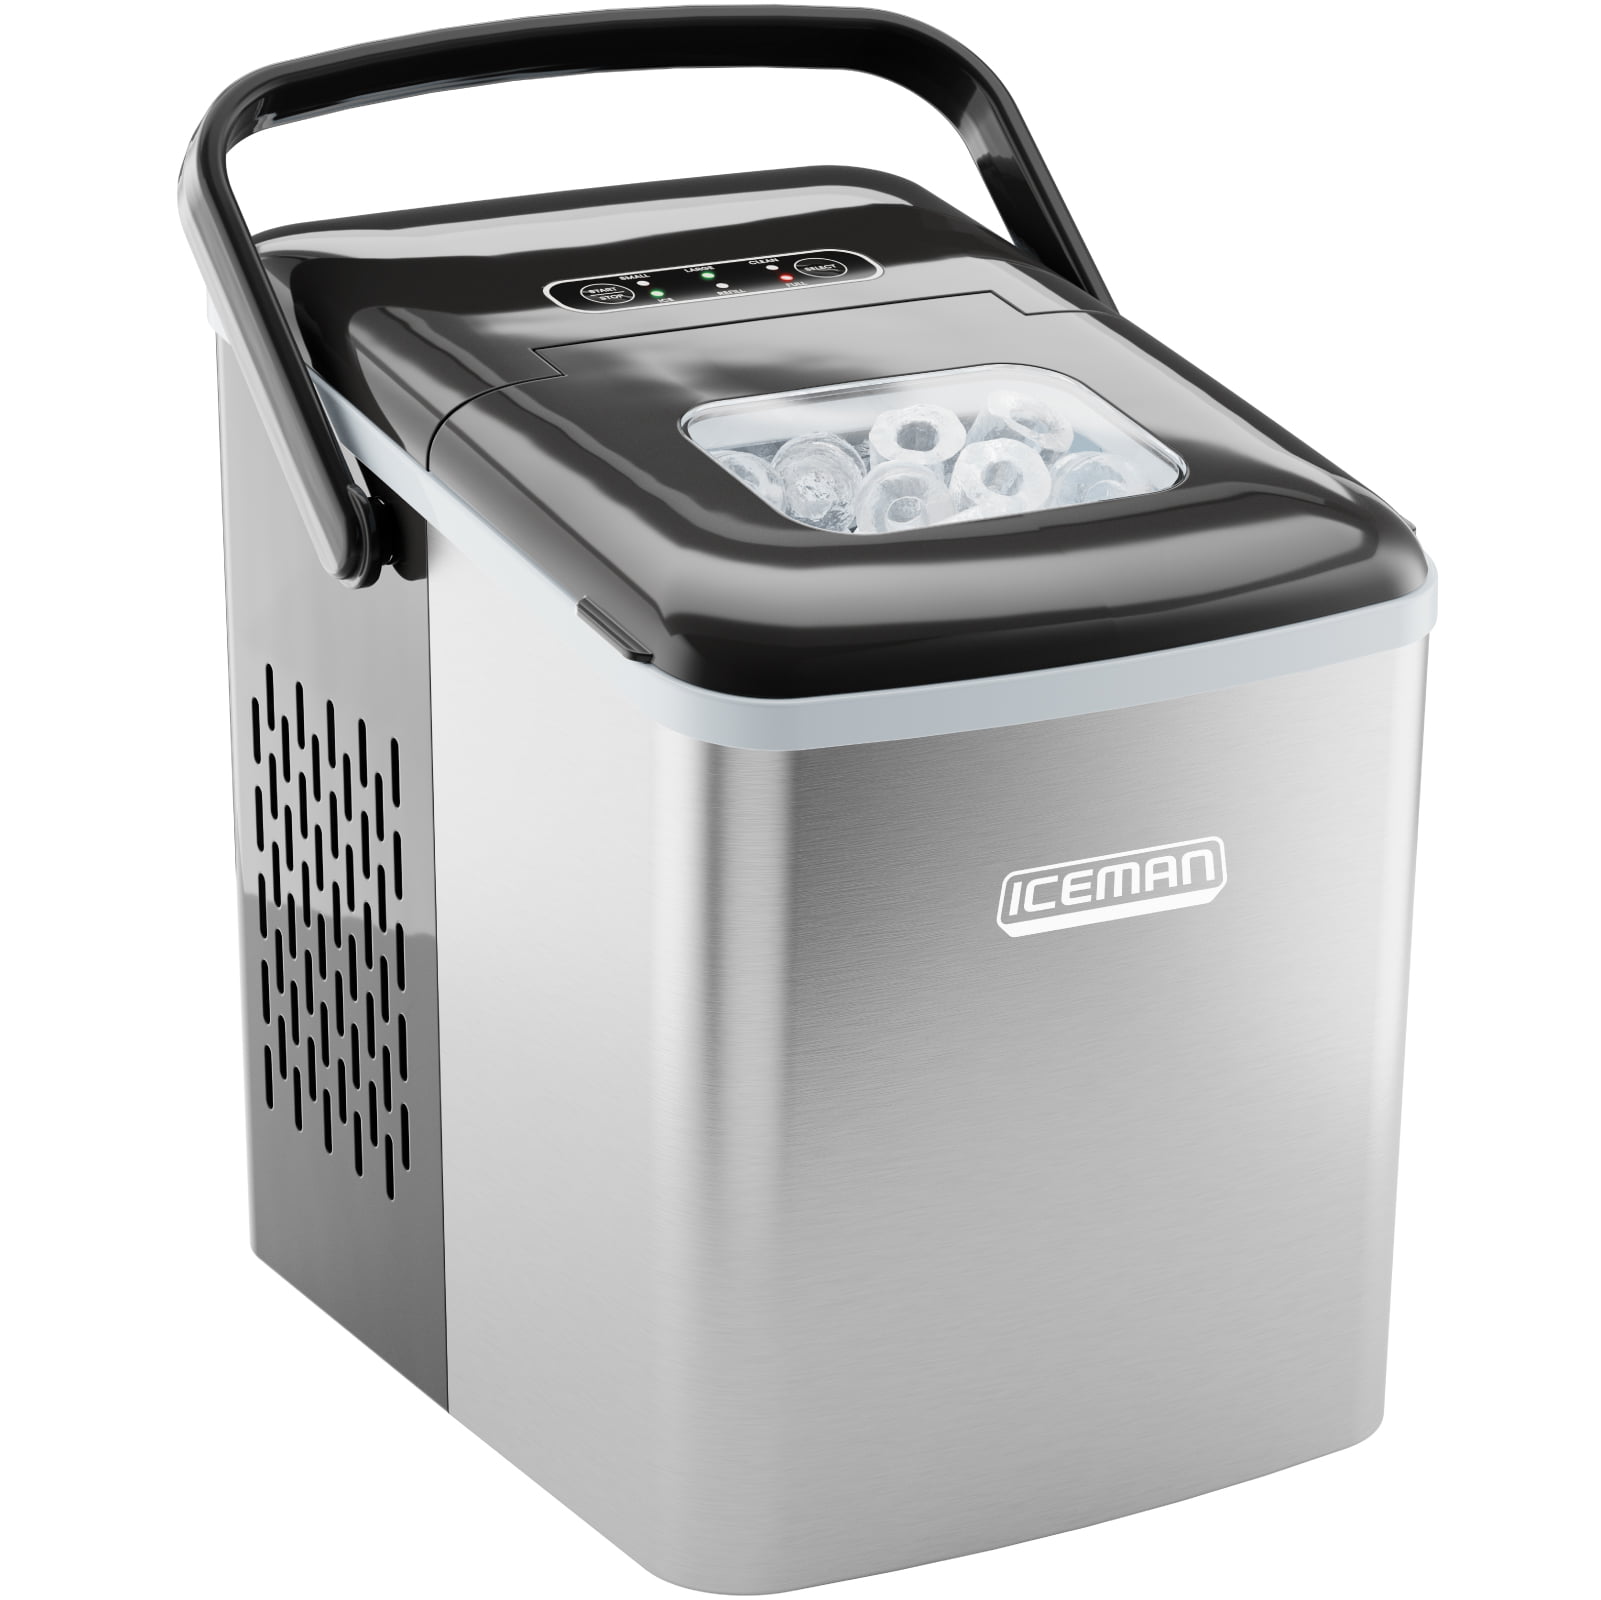 1.3-Lb Chefman Iceman Dual-Size Ice Machine W/ 6-Min Batch Time (Stainless Steel) $70.05 + Free Shipping